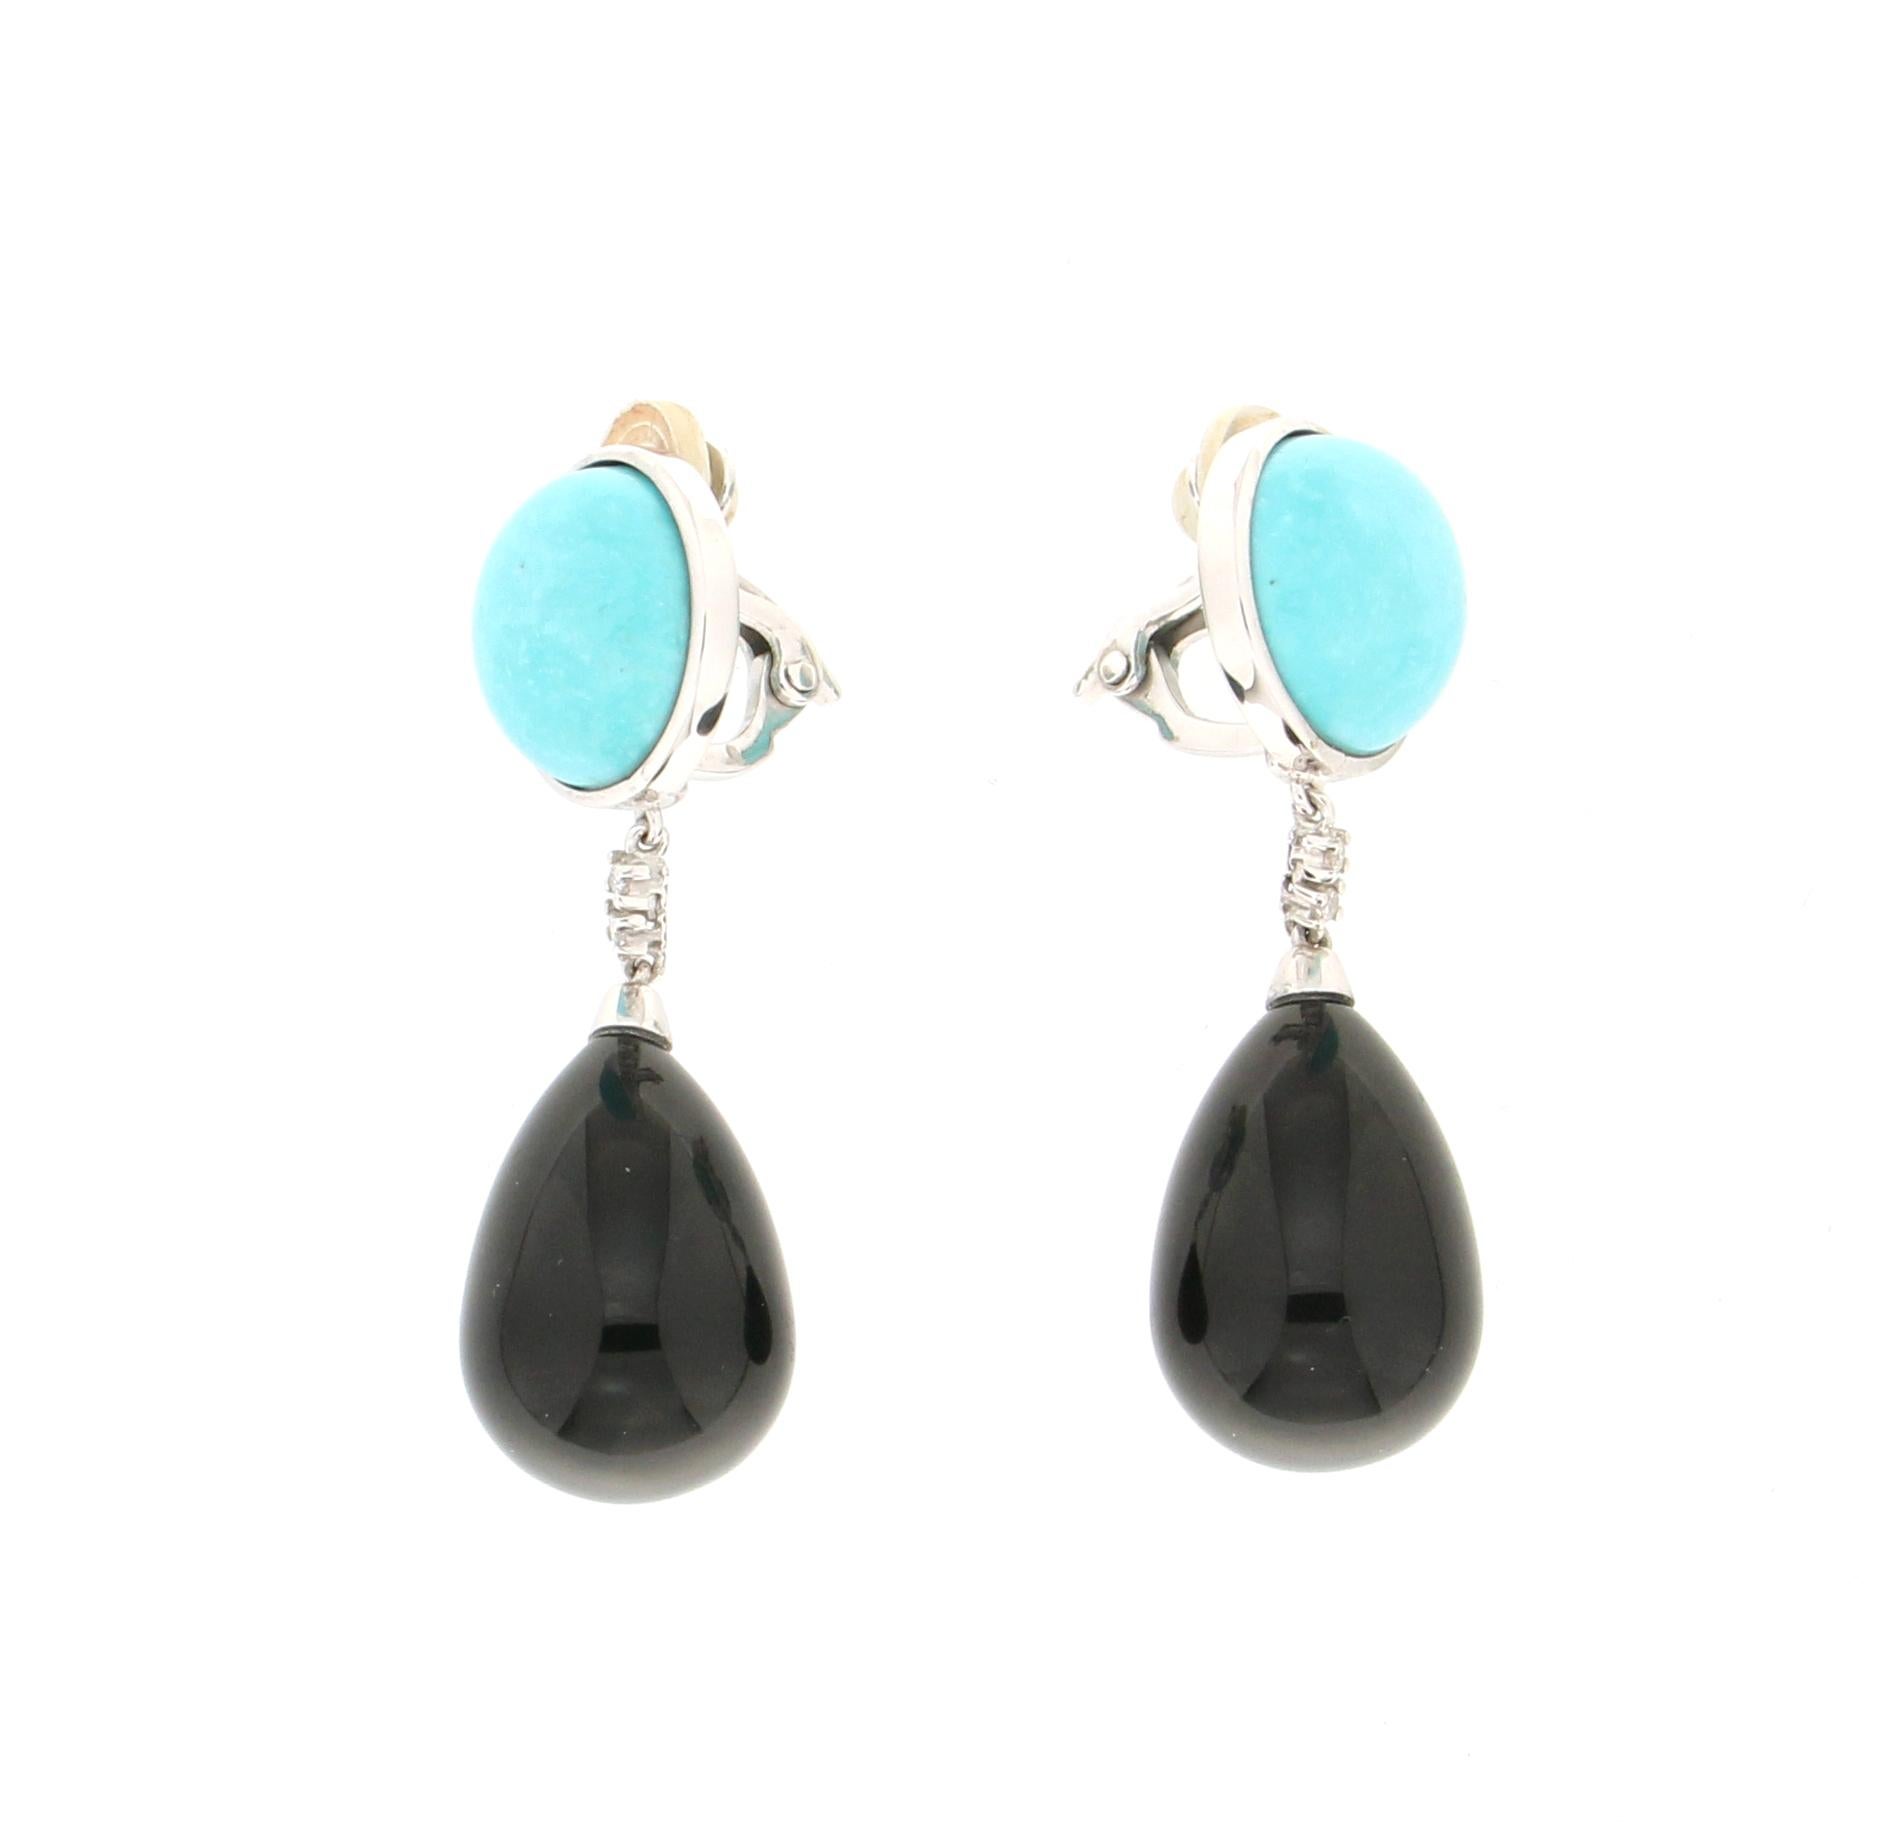 18 Karat white gold drop earrings. Handmade by our craftsmen and assembled with onyx, turquoise and diamonds.

Diamonds weight 0.10 karat
Turquoise weight 3.80 grams
Earrings total weight 20.20 grams
